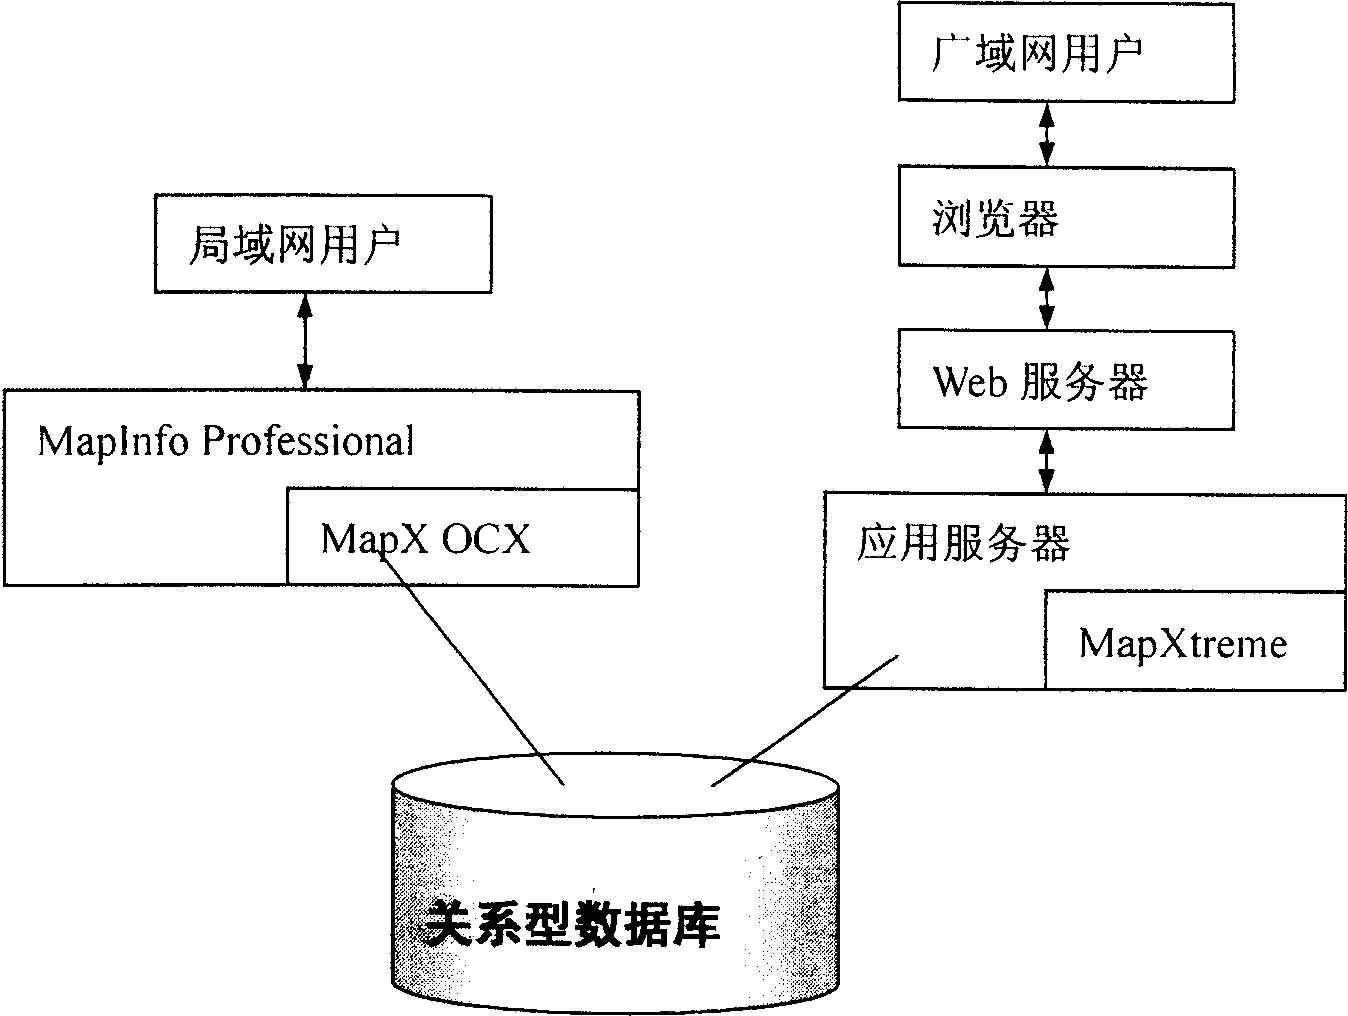 Method for setting service information and communicty managing based on GIS